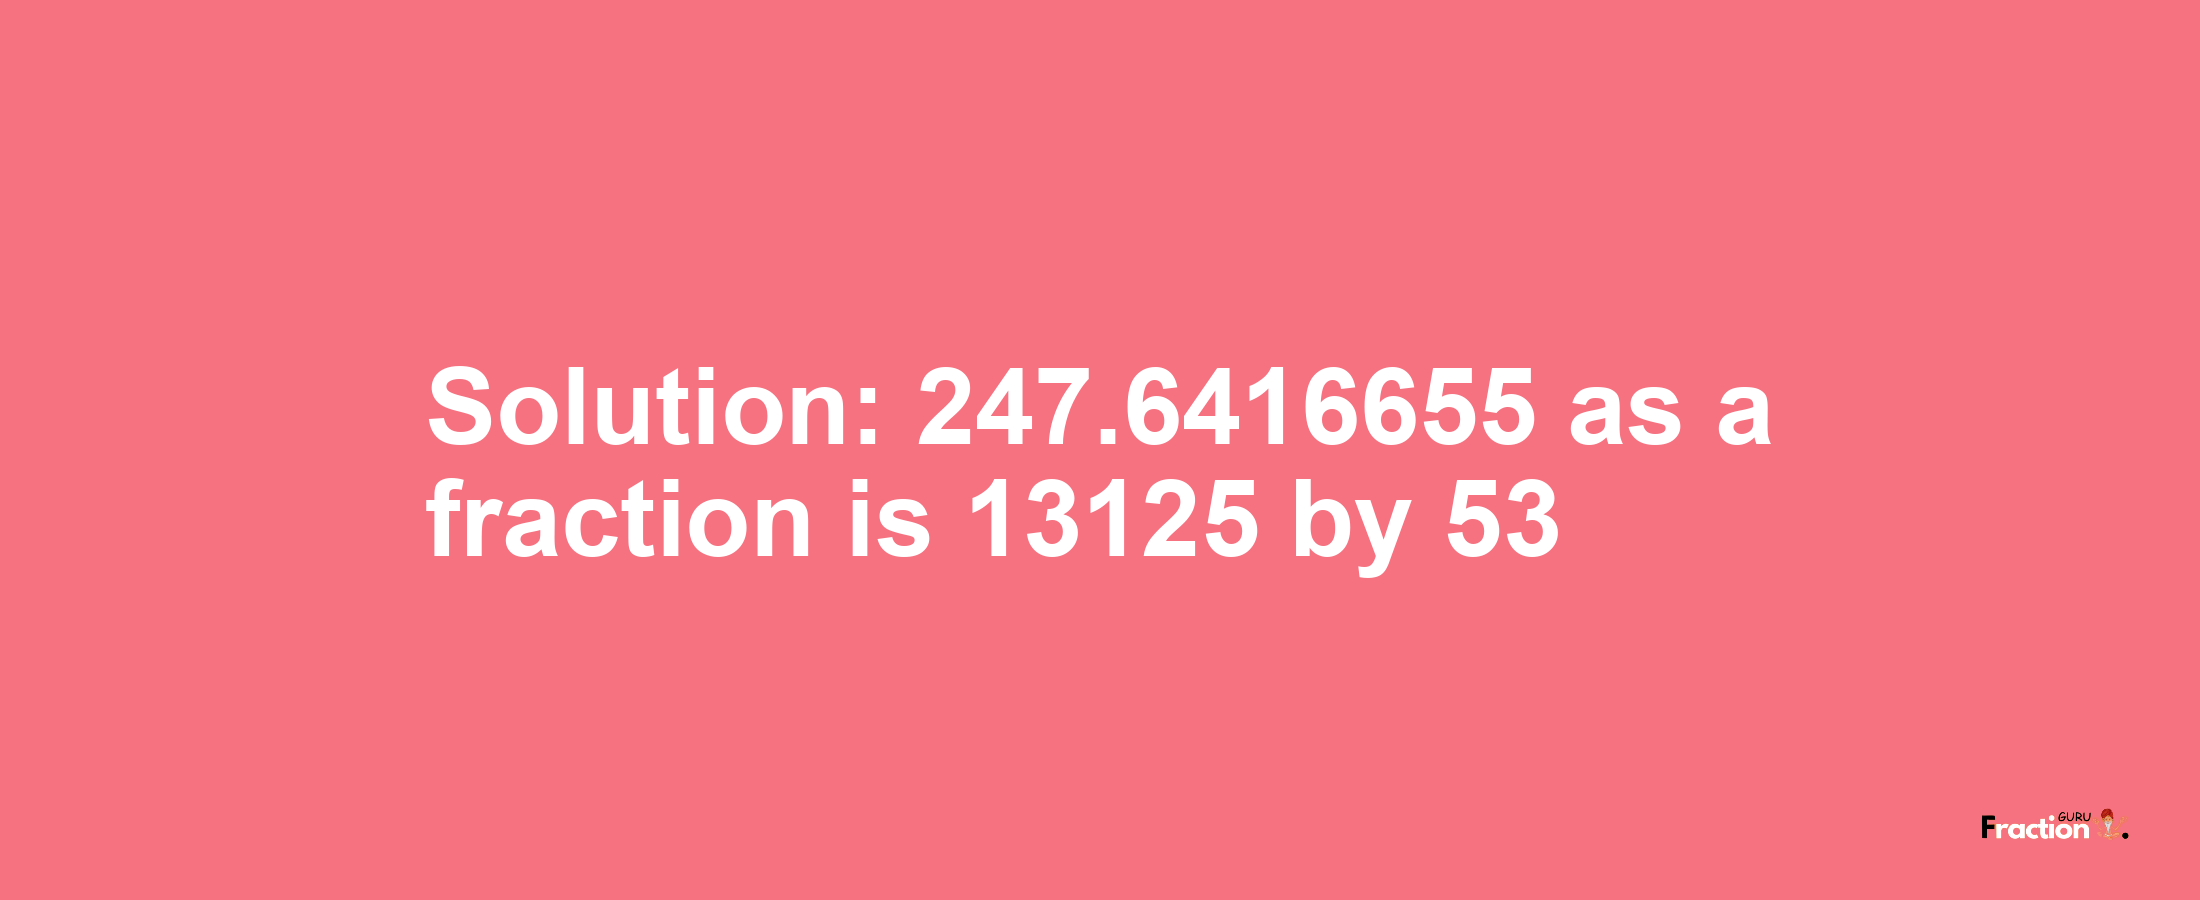 Solution:247.6416655 as a fraction is 13125/53